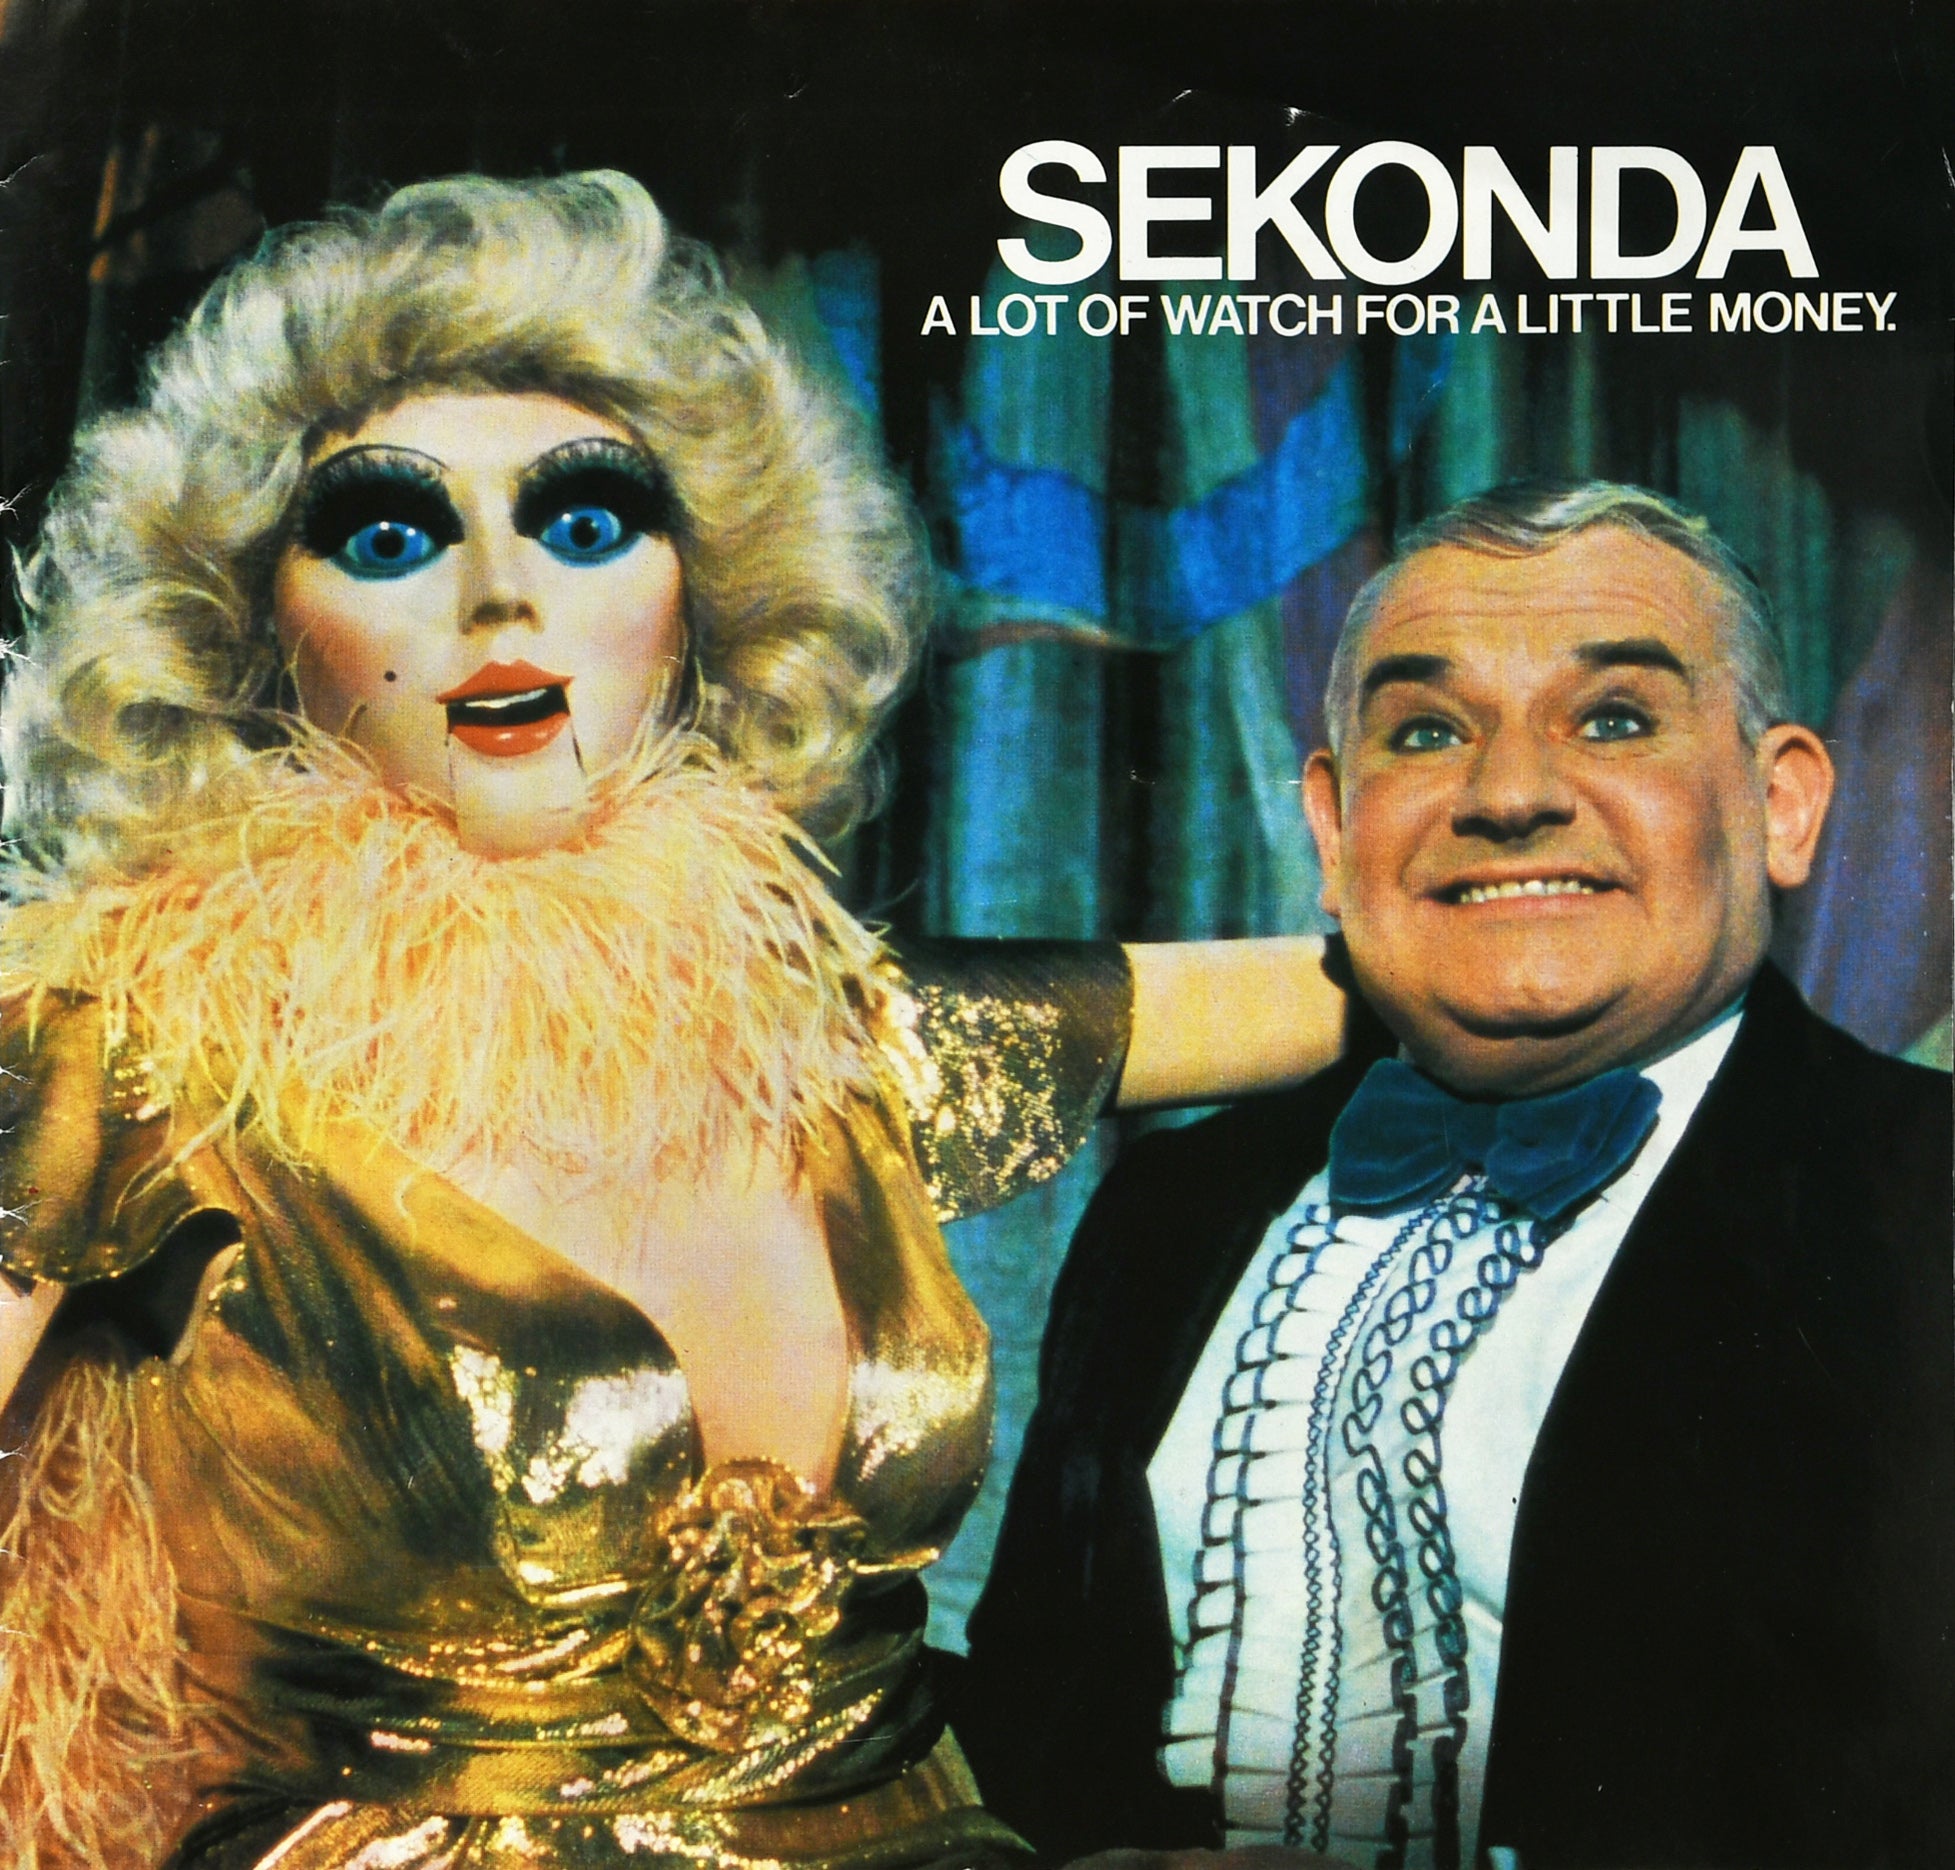 The ventriloquist’s dummy is being sold together with a period Sekonda catalogue featuring Ronnie Barker and the dummy on the cover. (Cheffins/ PA)